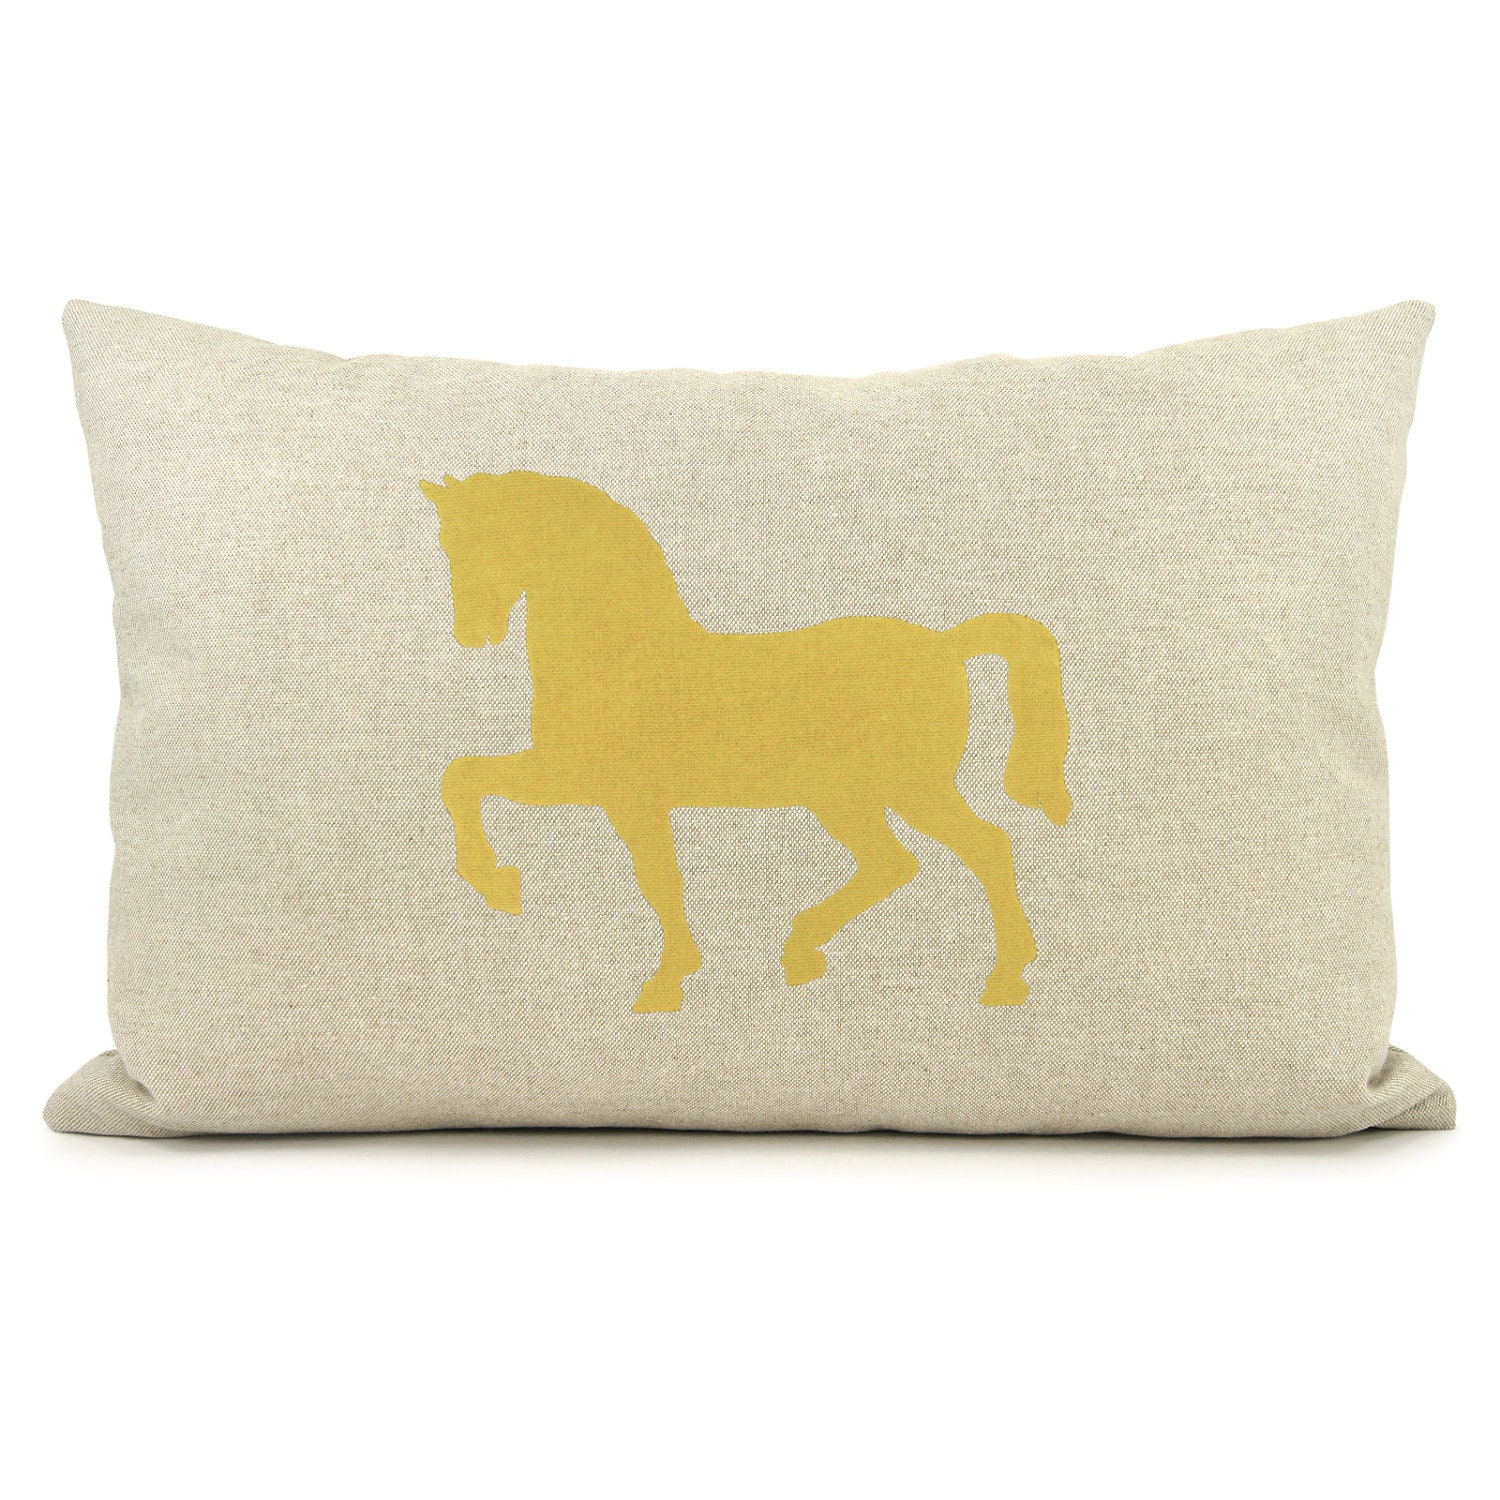 12x18 horse pillow cover Lumbar pillow cover by ClassicByNature